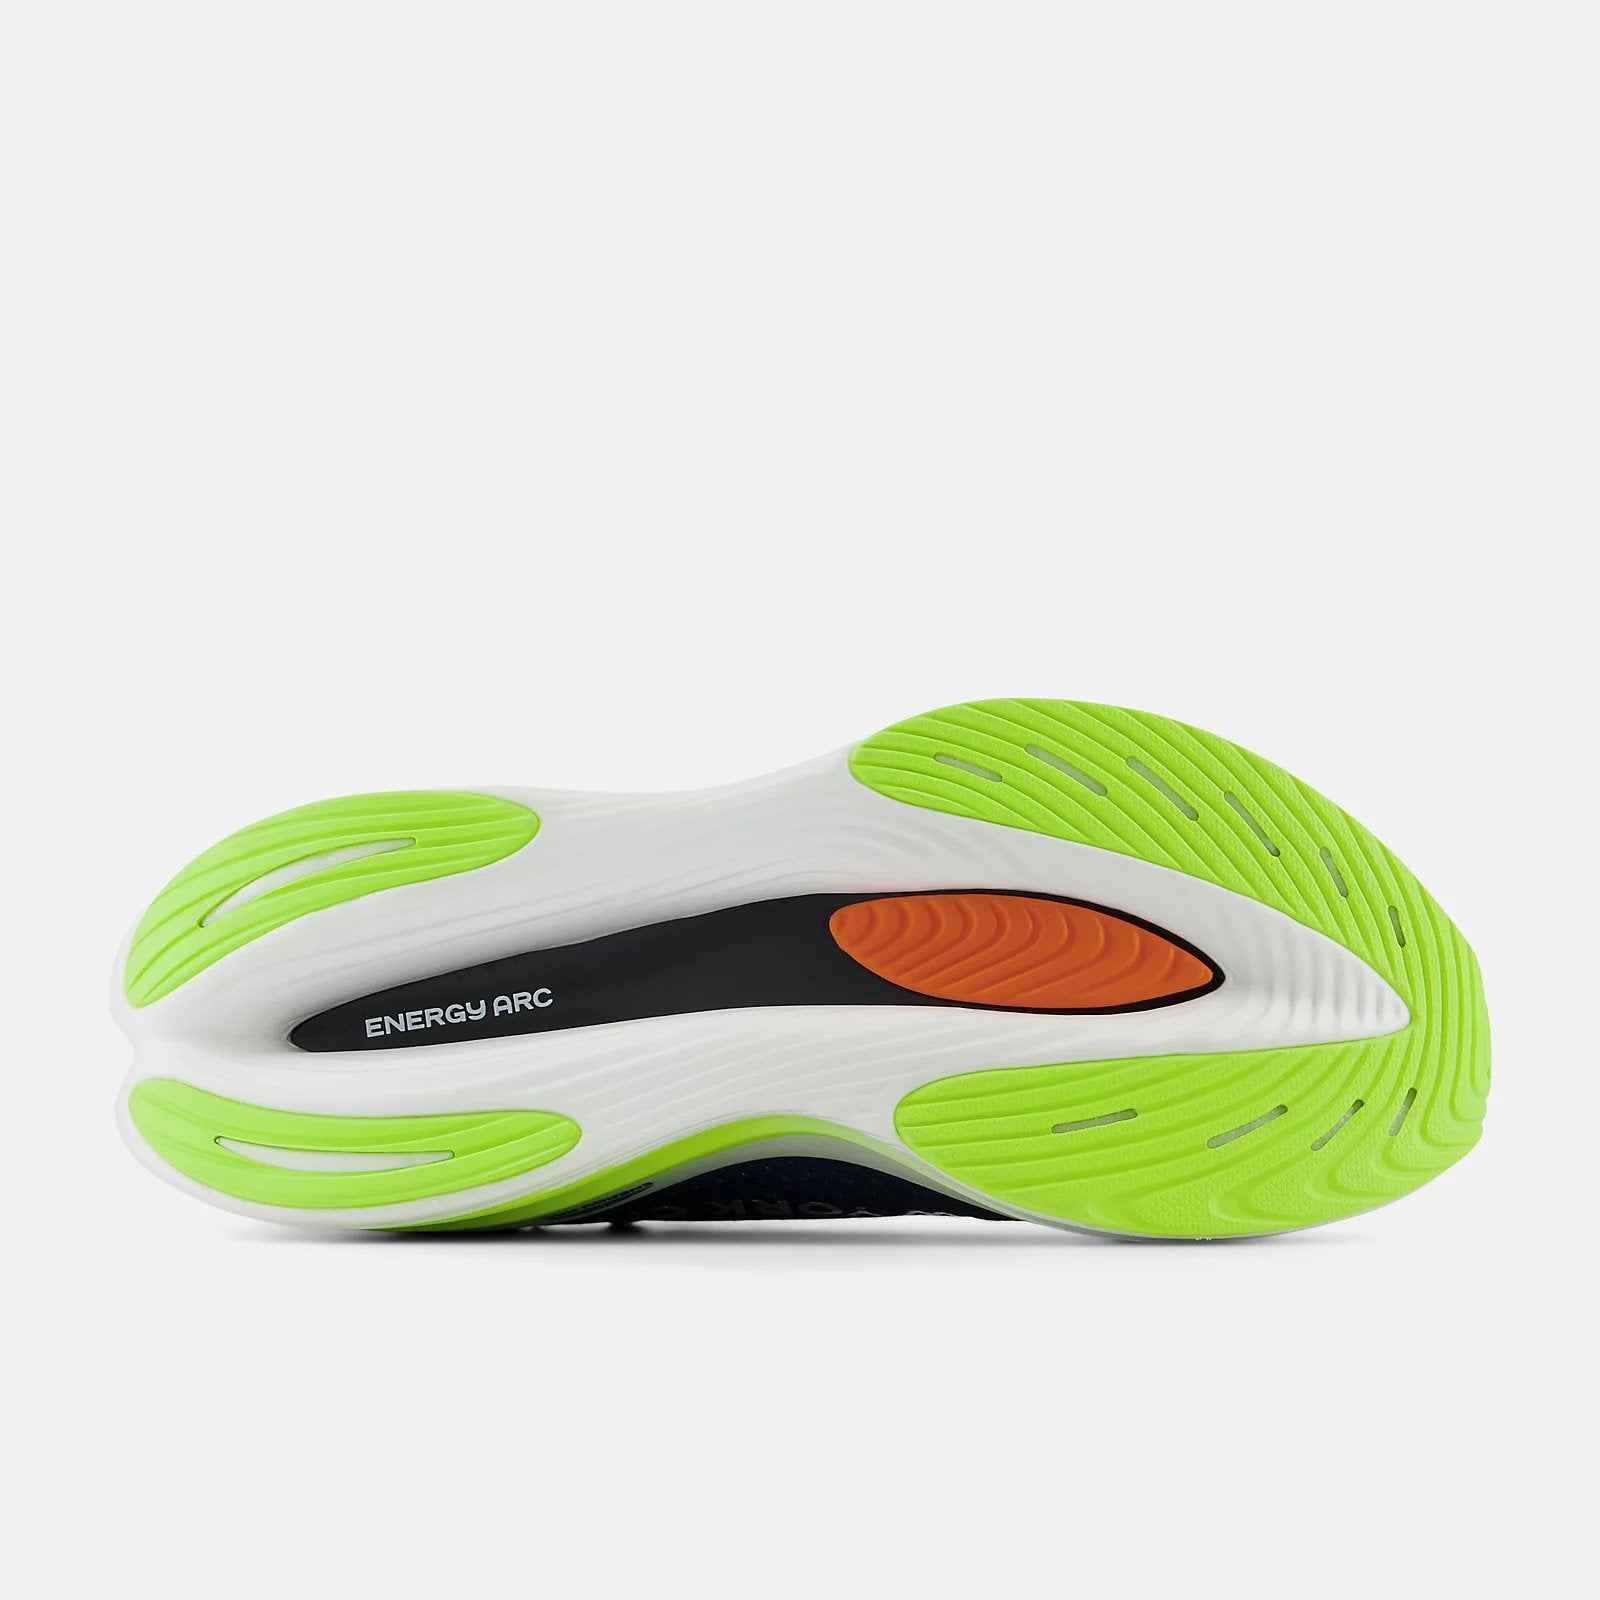 The outsole of this special editiion Super Comp Elite V3 looks just like the normal versiion